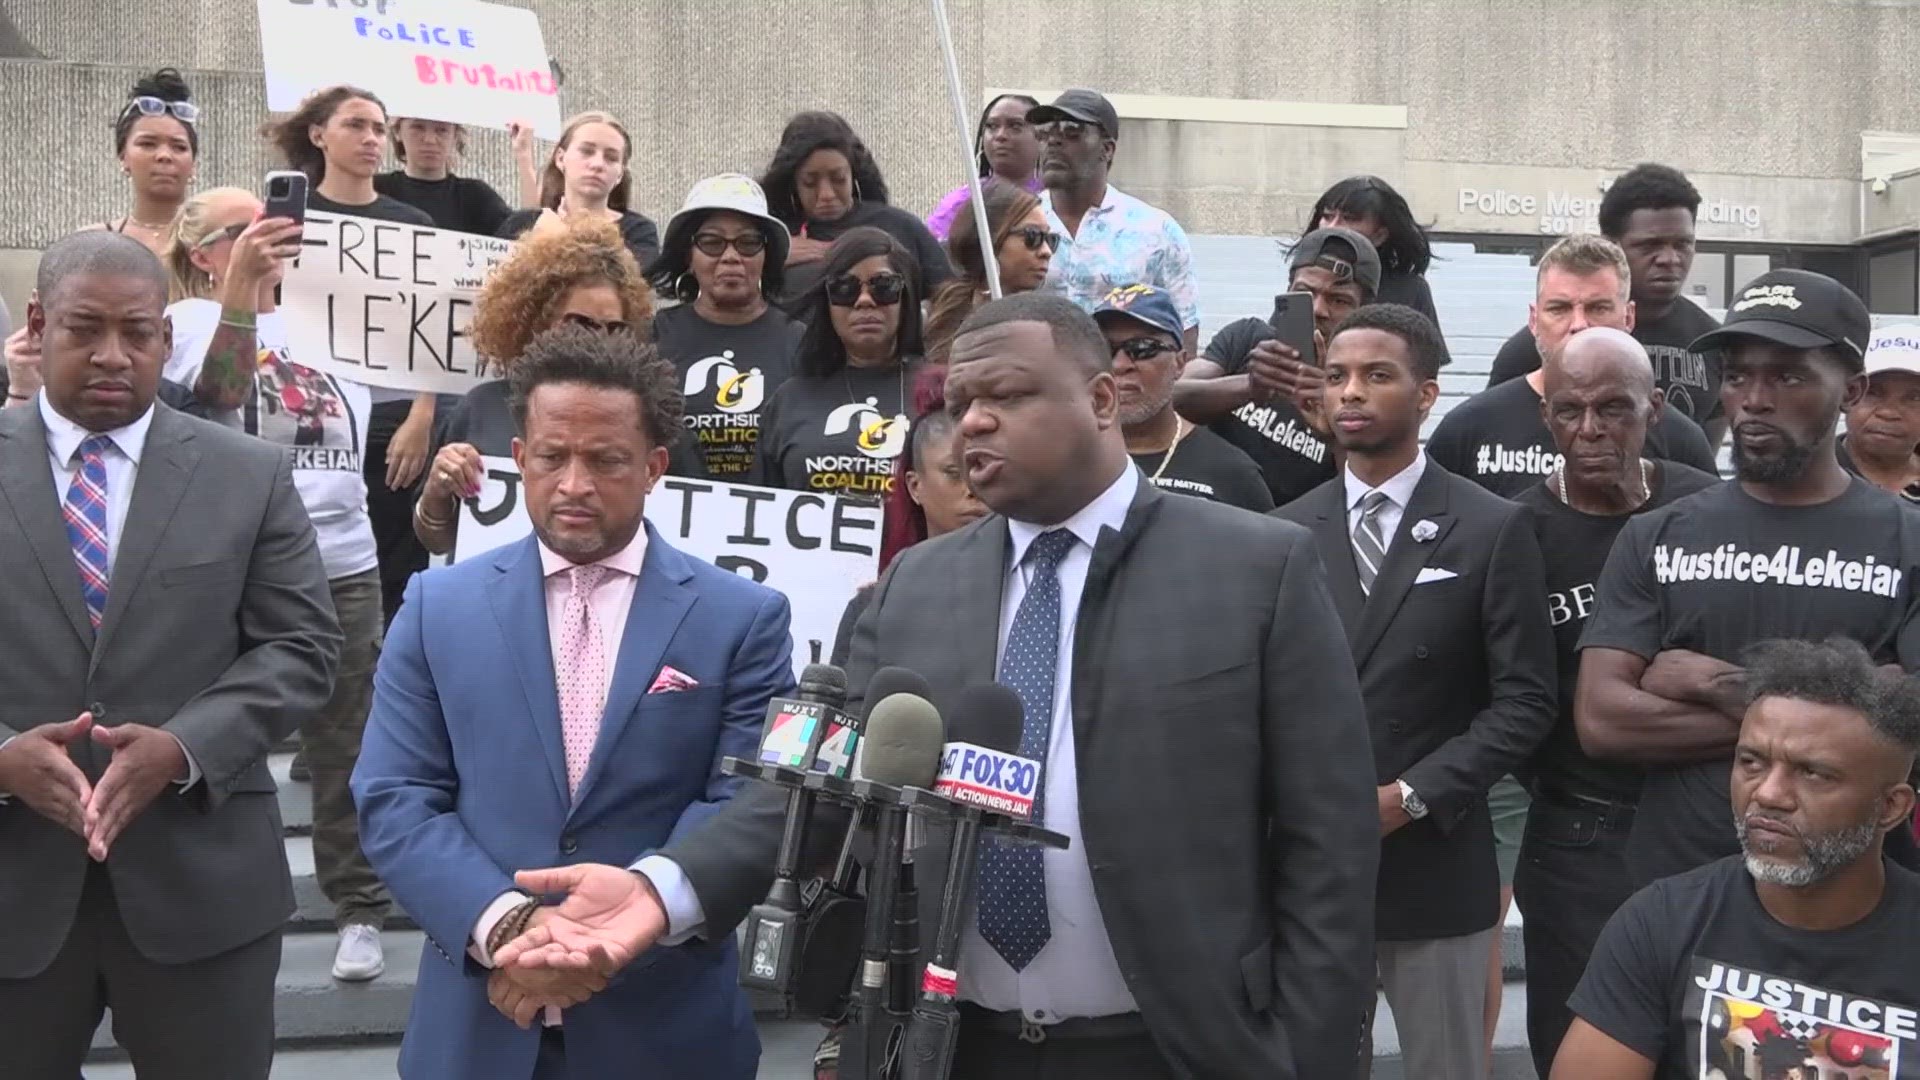 During a news conference Tuesday, 24-year-old Le'Keian Woods' attorneys alleged that responding officers used 'deadly' and 'unlawful' force during Woods' arrest.